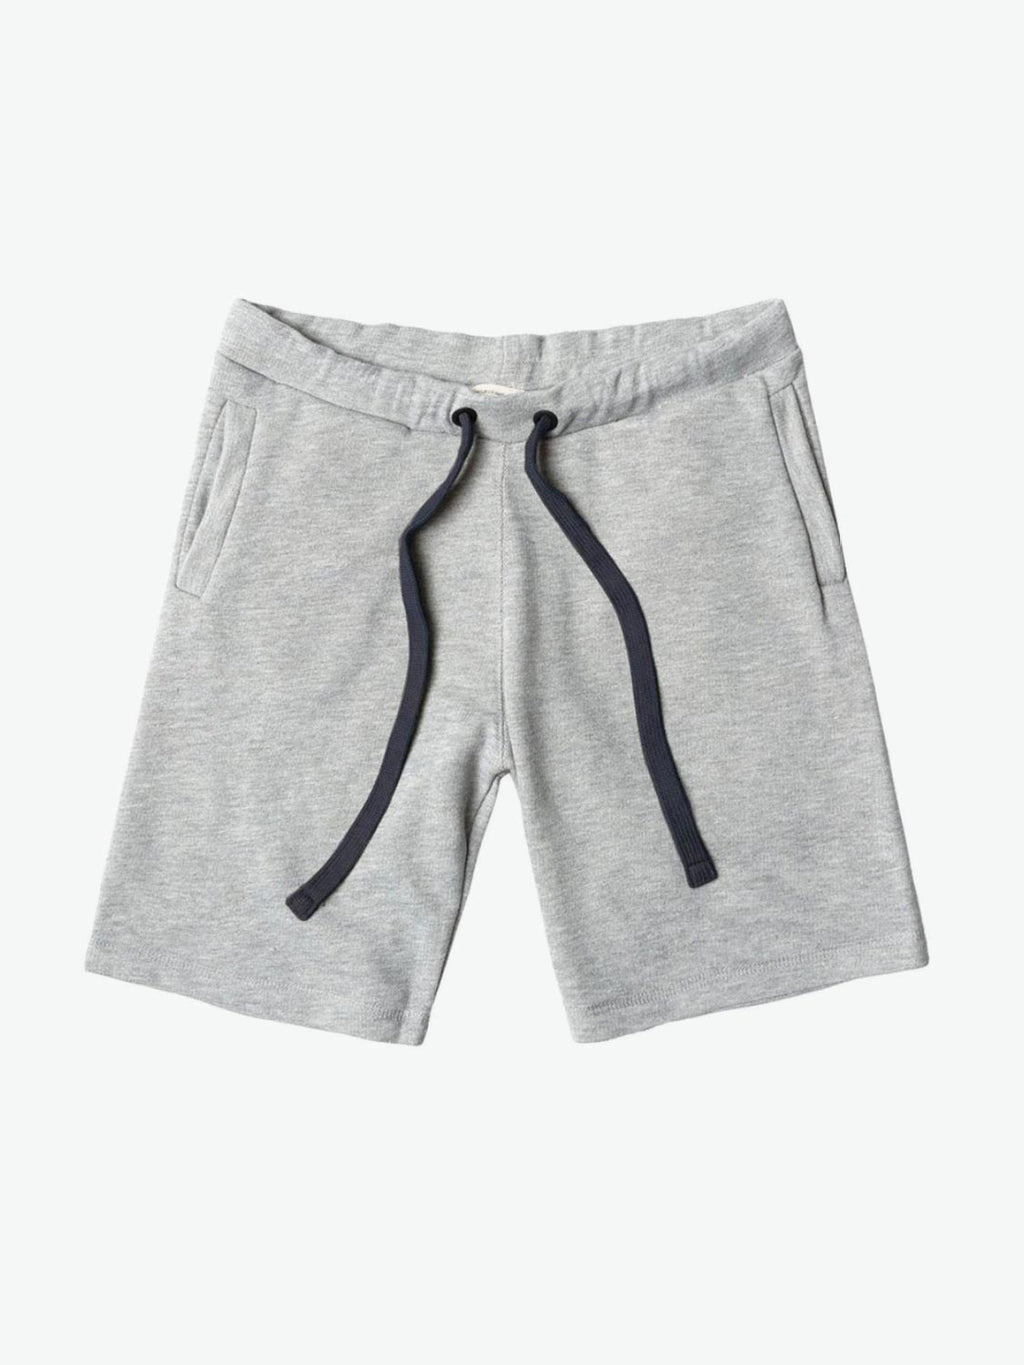 Shorts and Sweatshorts | The Project Garments